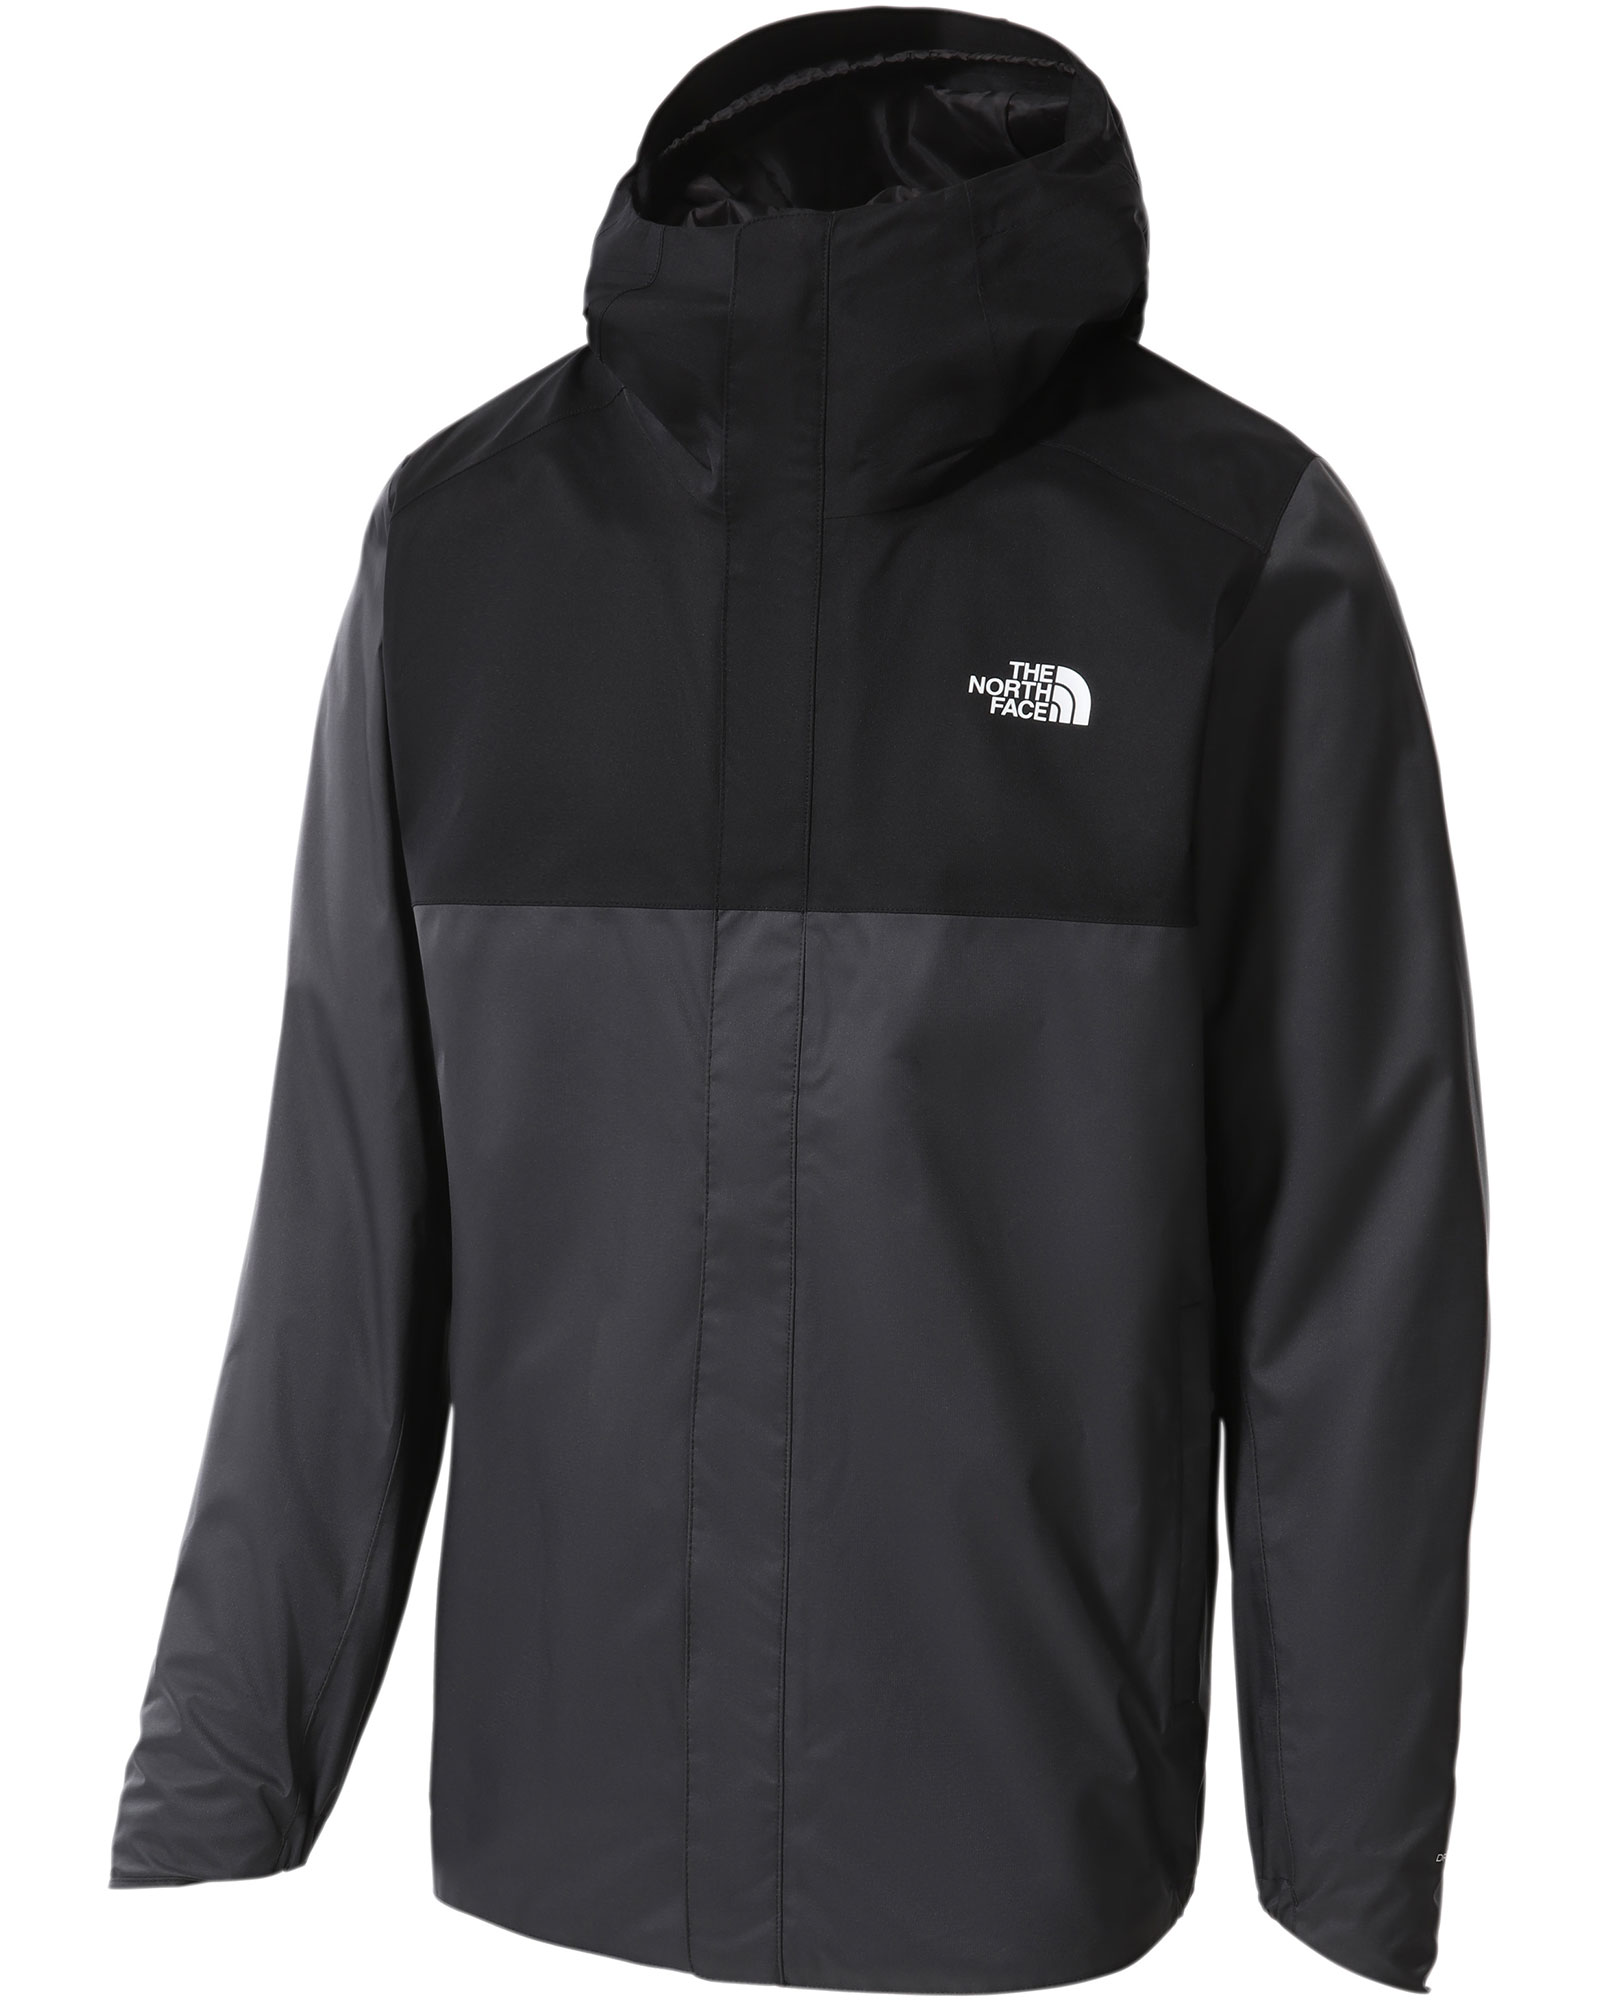 The North Face Mens Quest Zip-in Jacket